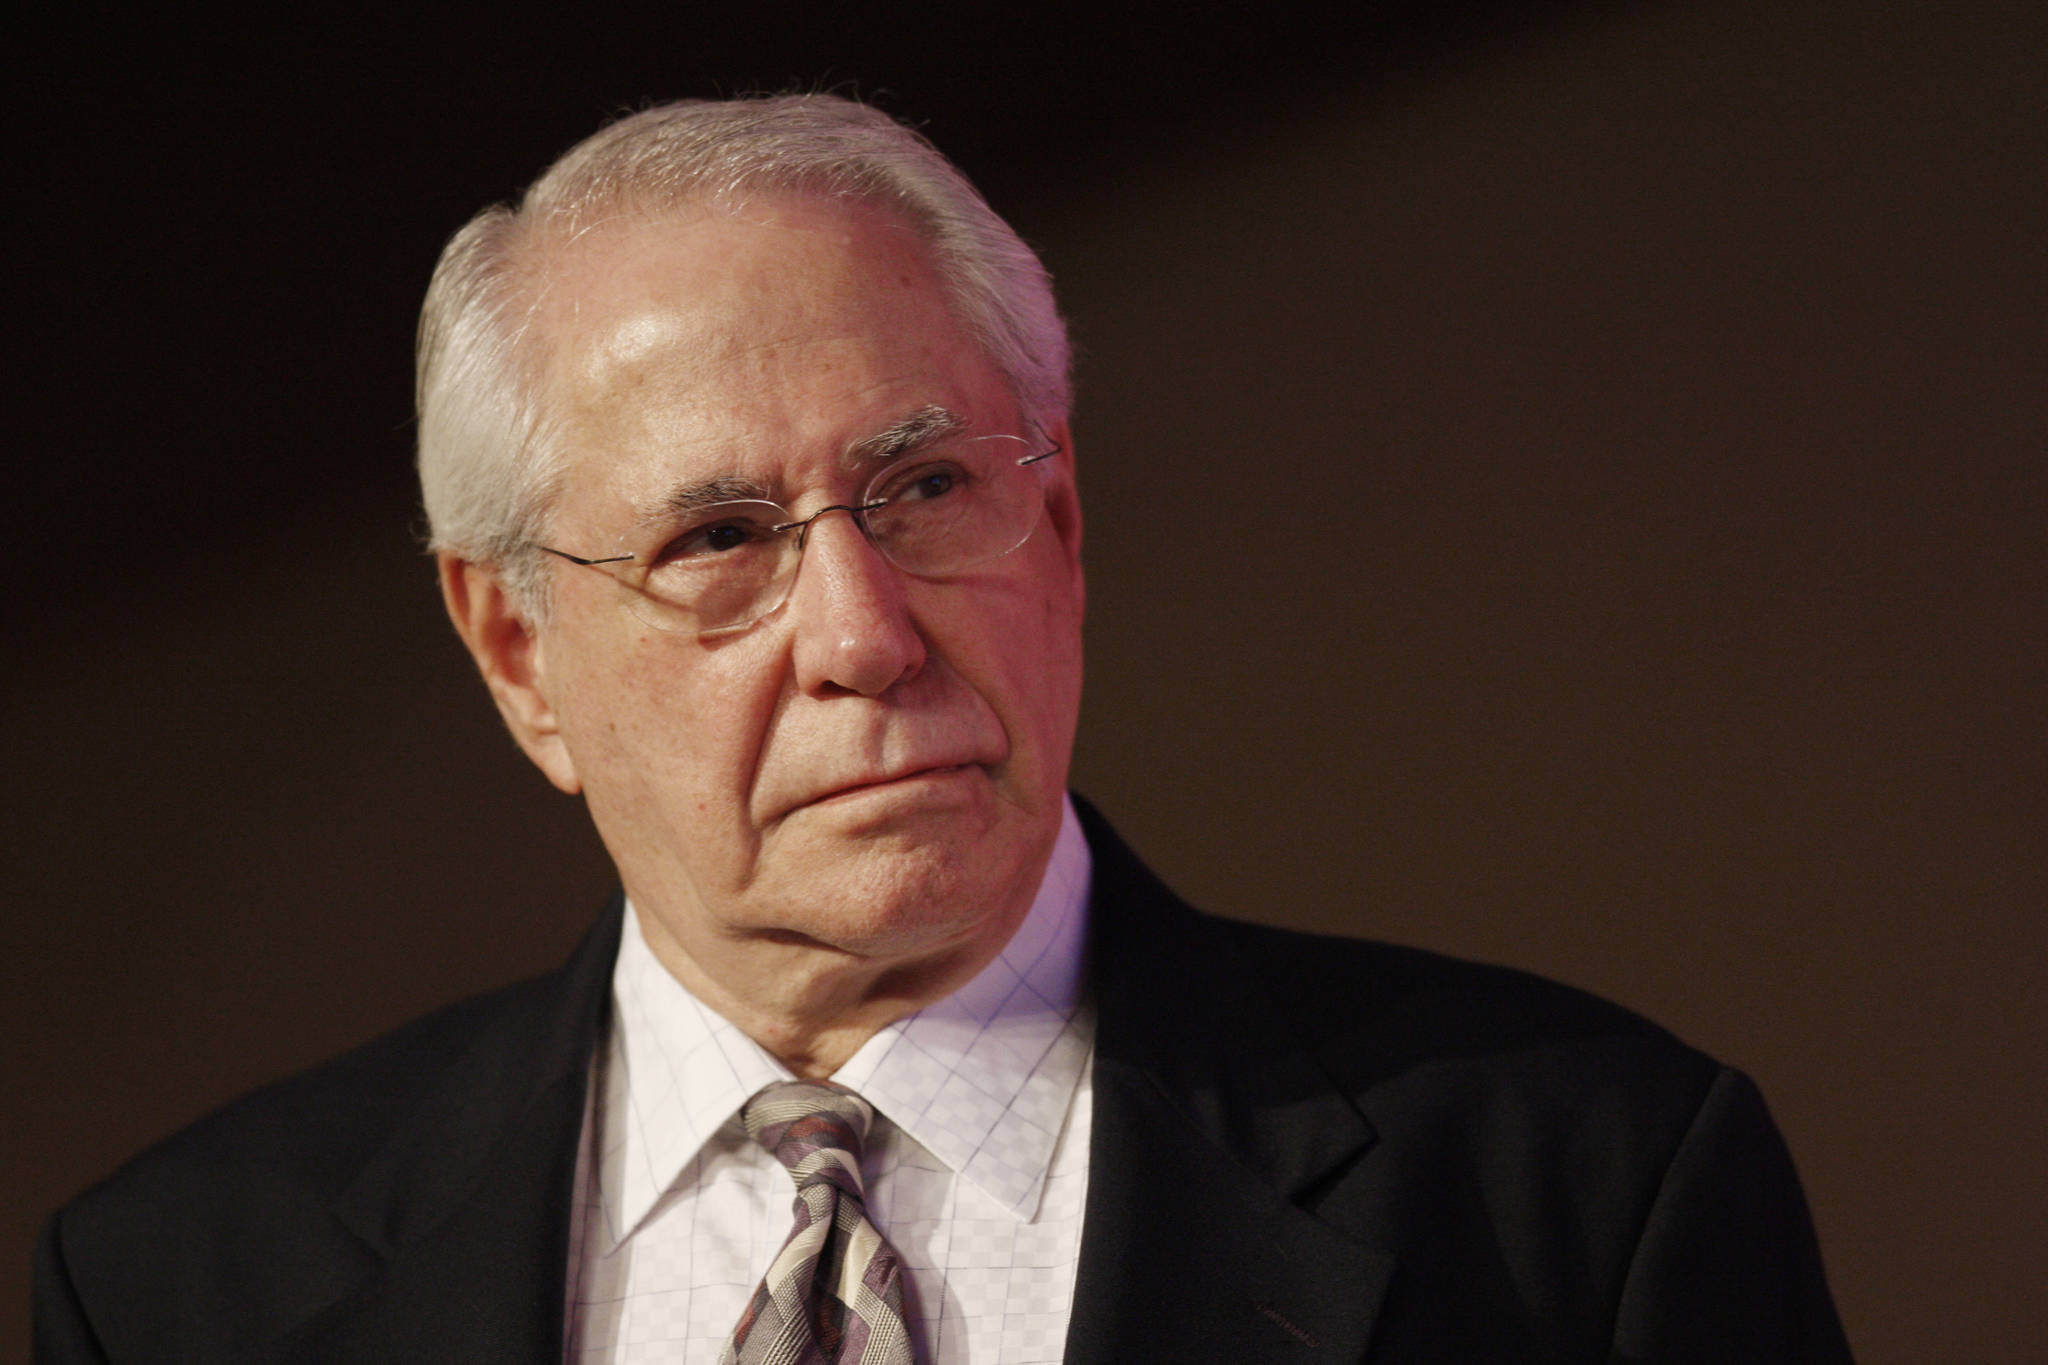 Then-Democratic presidential hopeful and former Alaska Sen. Mike Gravel speaks at the "Take Back America" political conference in Washington, in this June 2007 photo. Gravel, a former U.S. senator from Alaska who read the Pentagon Papers into the Congressional Record and confronted Barack Obama about nuclear weapons during a later presidential run, has died. He was 91. Gravel, who represented Alaska as a Democrat in the Senate from 1969 to 1981, died Saturday, June 26, 2021. Gravel had been living in Seaside, California, and was in failing health, said Theodore W. Johnson, a former aide. (AP Photo / Charles Dharapak)